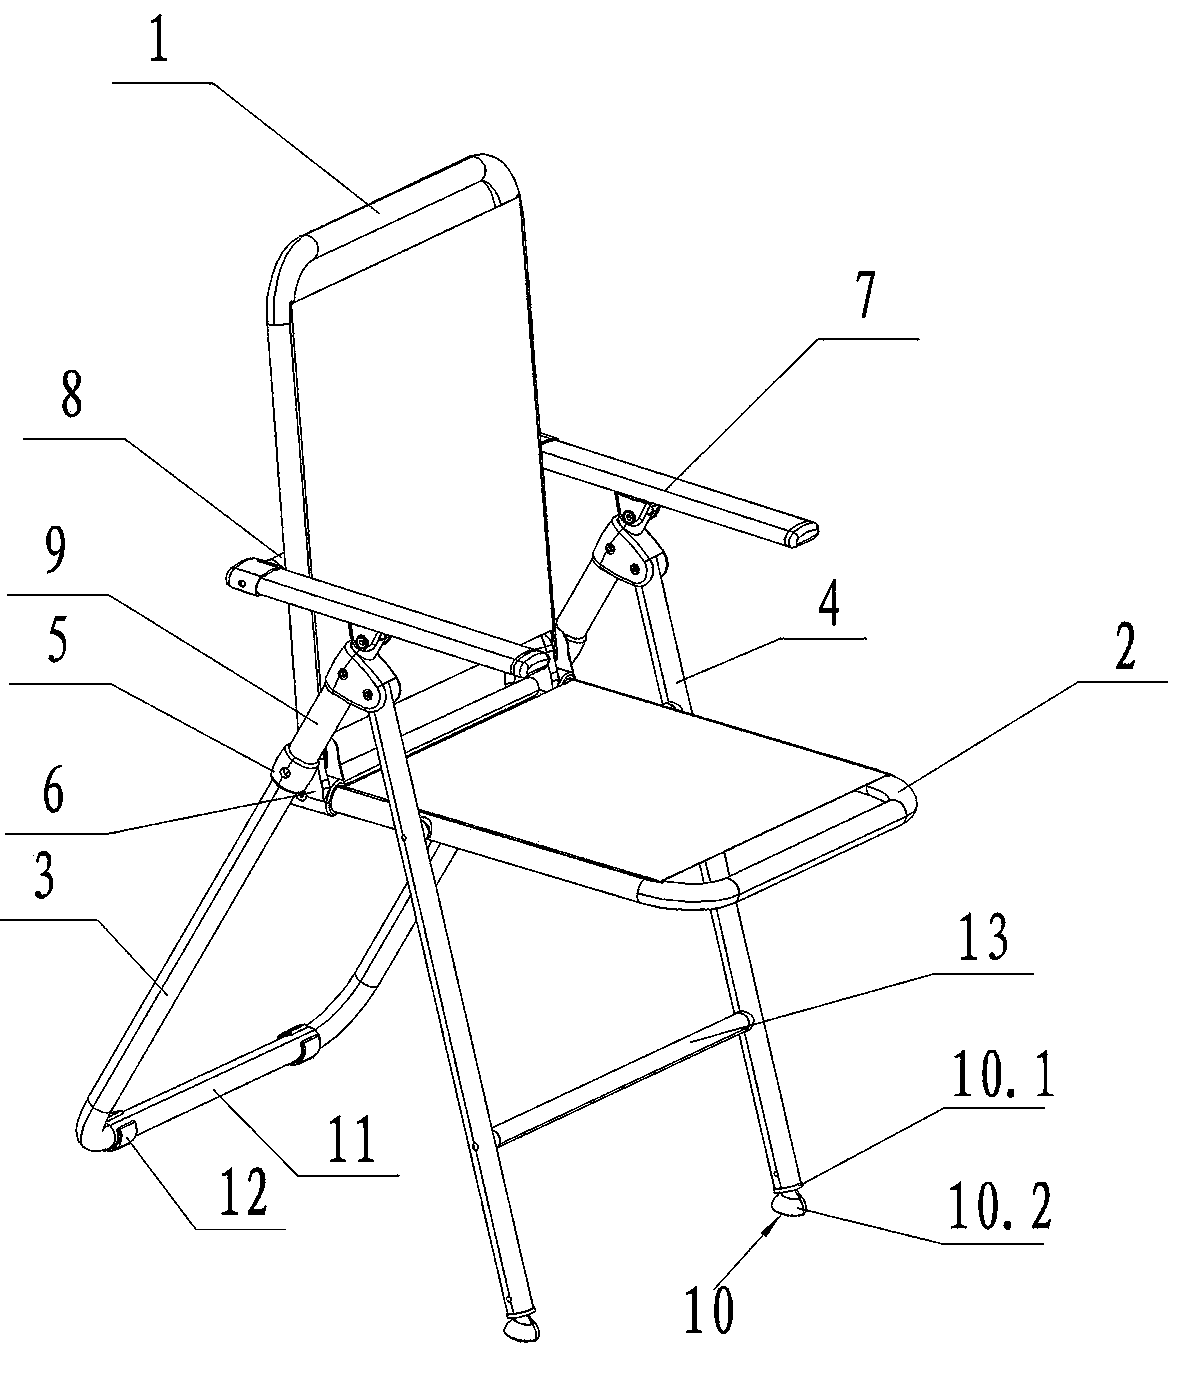 Folding chair and alumium section used by folding chair